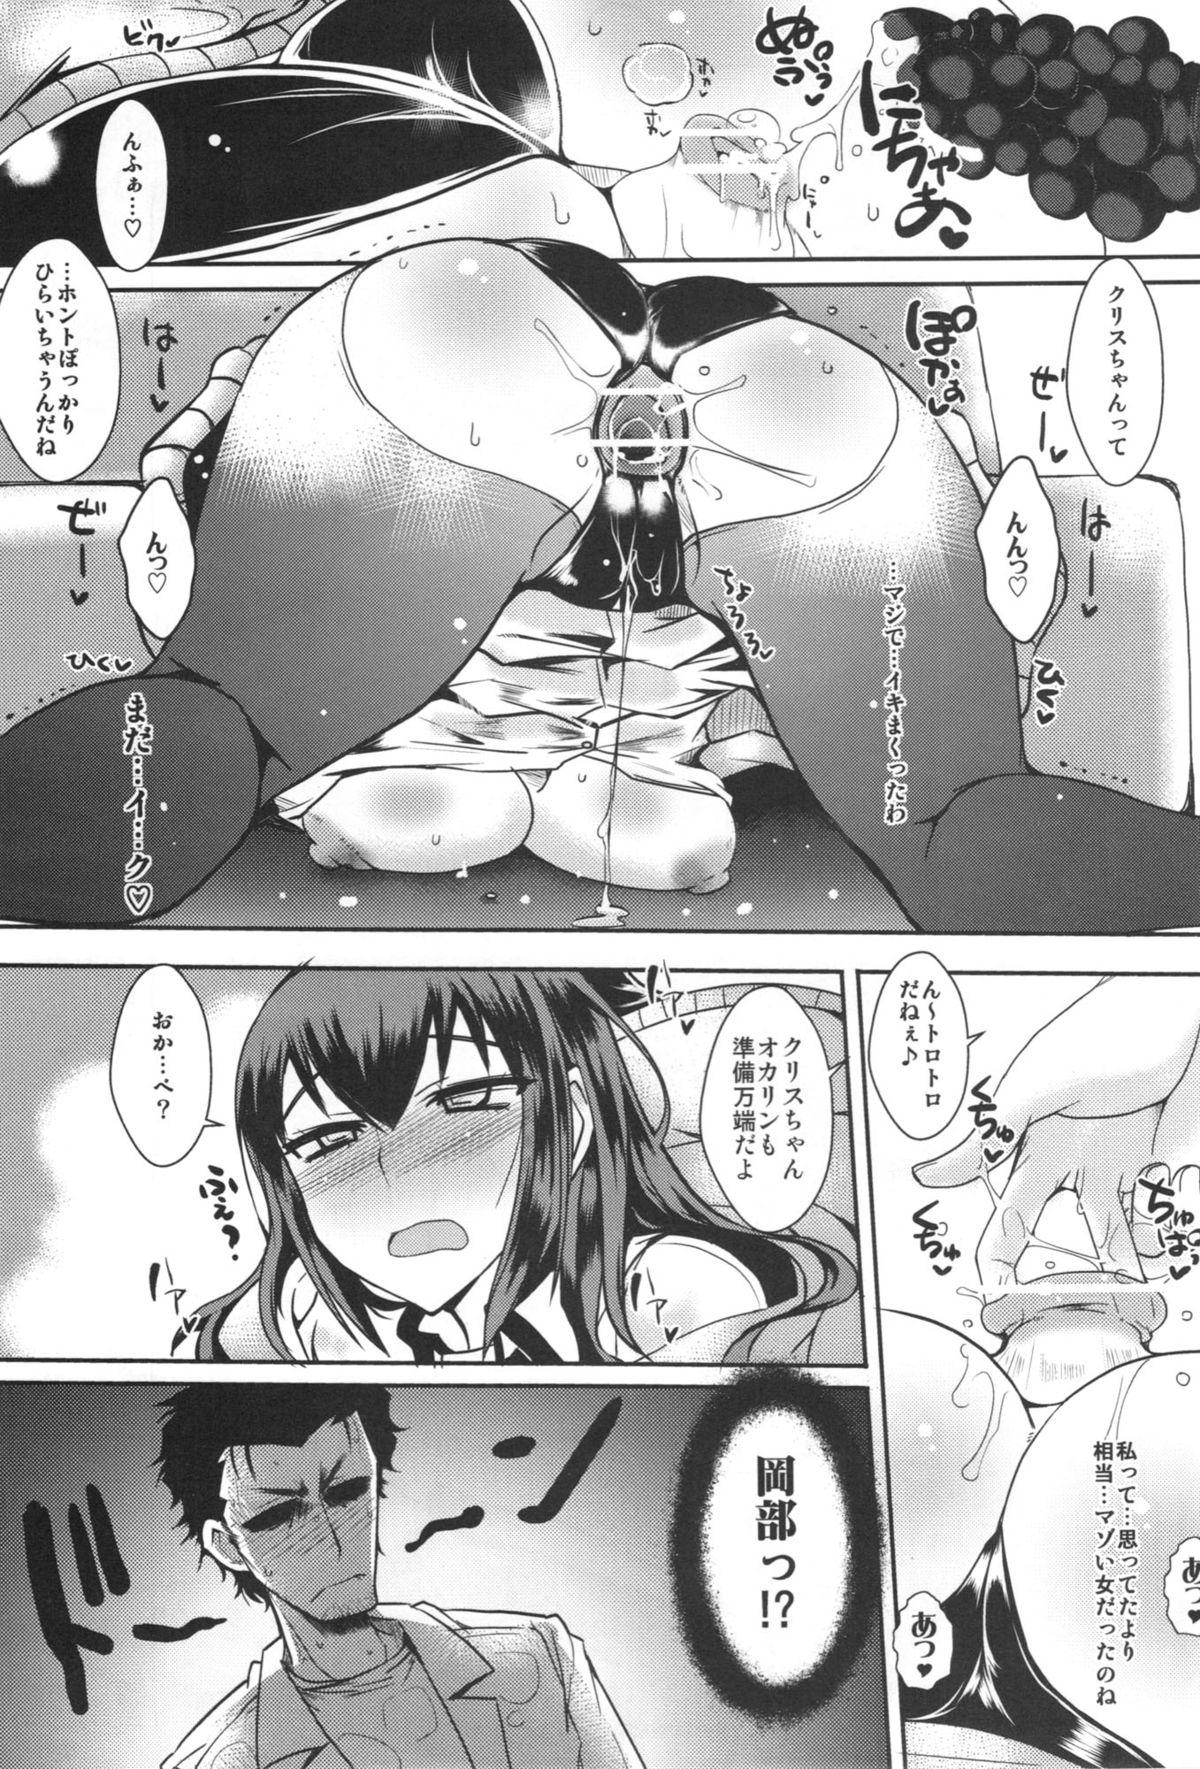 Nude Shirikan Aikou no Sodominists - Steinsgate Raw - Page 9